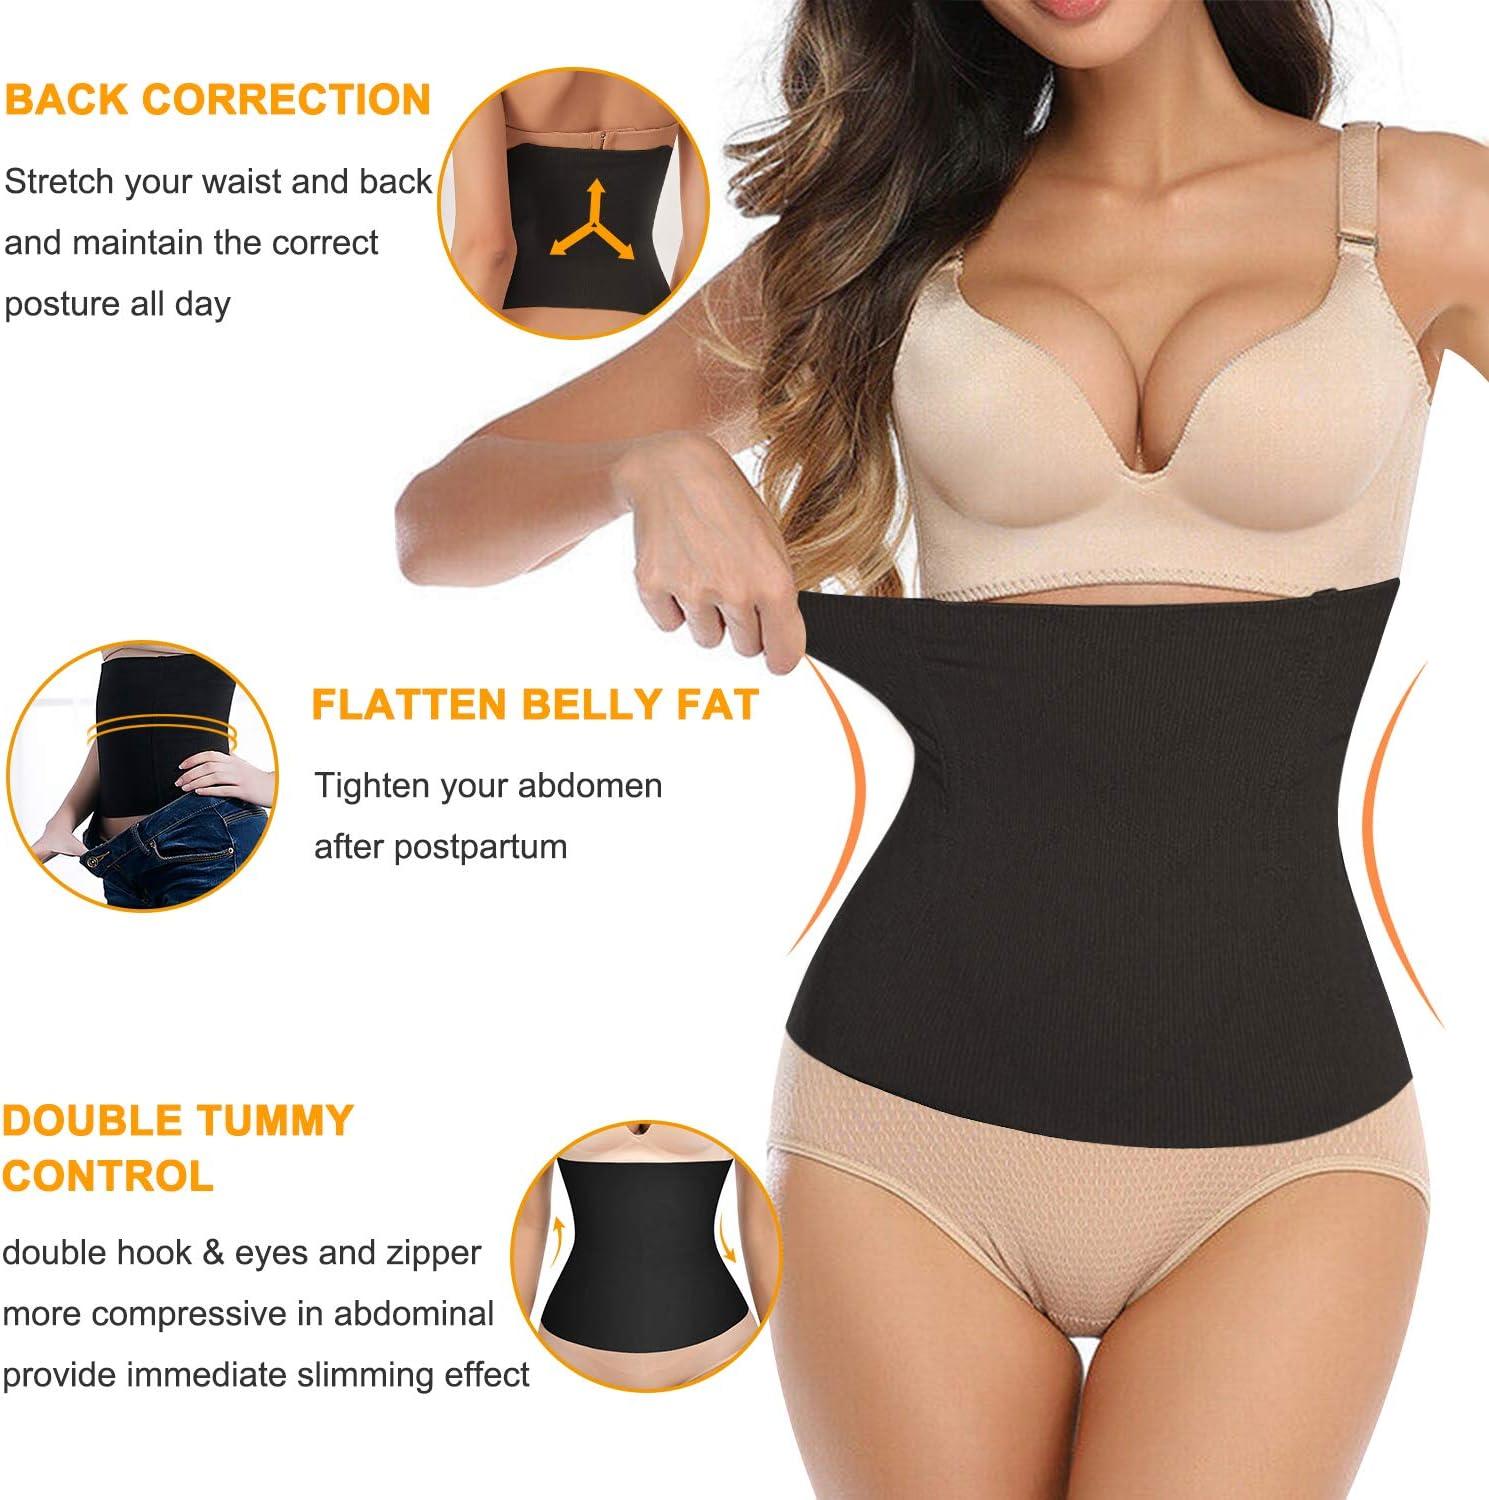 Bingrong 2 in 1 Waist Trainer for Women Postpartum Belly Band Maternity  Recovery Belt Seamless Girdle Tummy Control Body Shaper Shapewear Black M